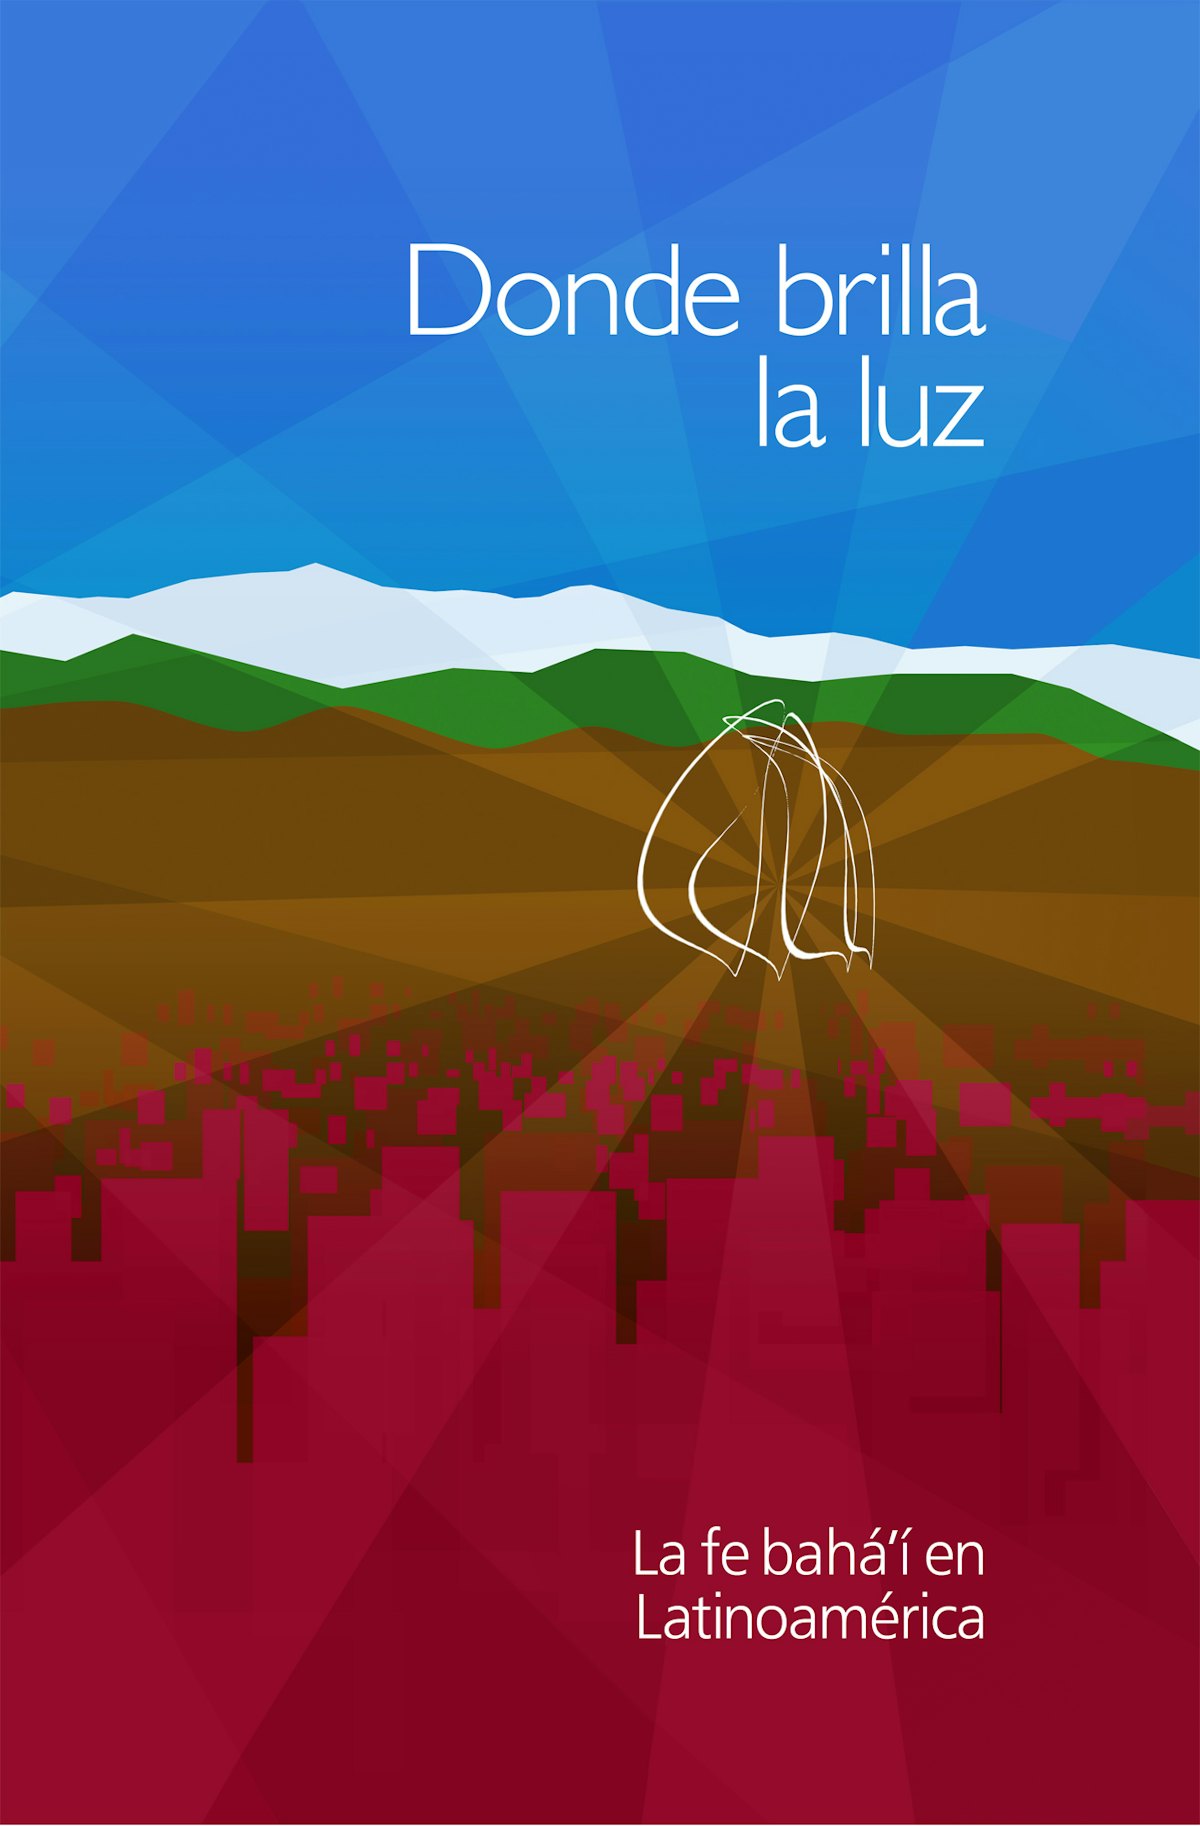 The new book, titled "Donde Brilla La Luz" – "Where the Light Shines" – is designed to introduce the Baha'i Faith and includes reflections on the impact that the Temple in Chile is intended to make on Latin-American society.